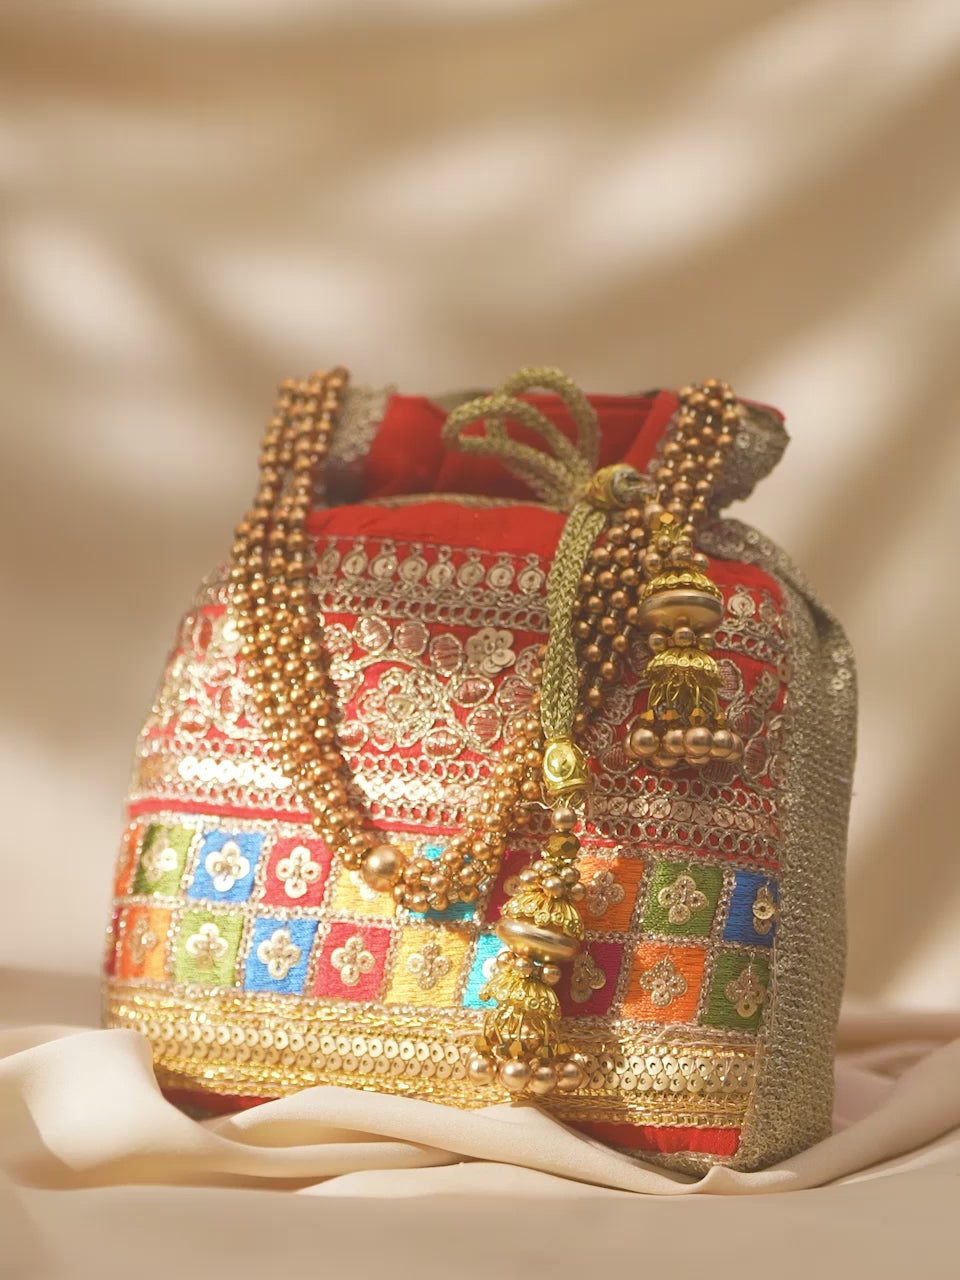 Rubans Red Coloured Potli Bag With Multicoloured Embroidery Design